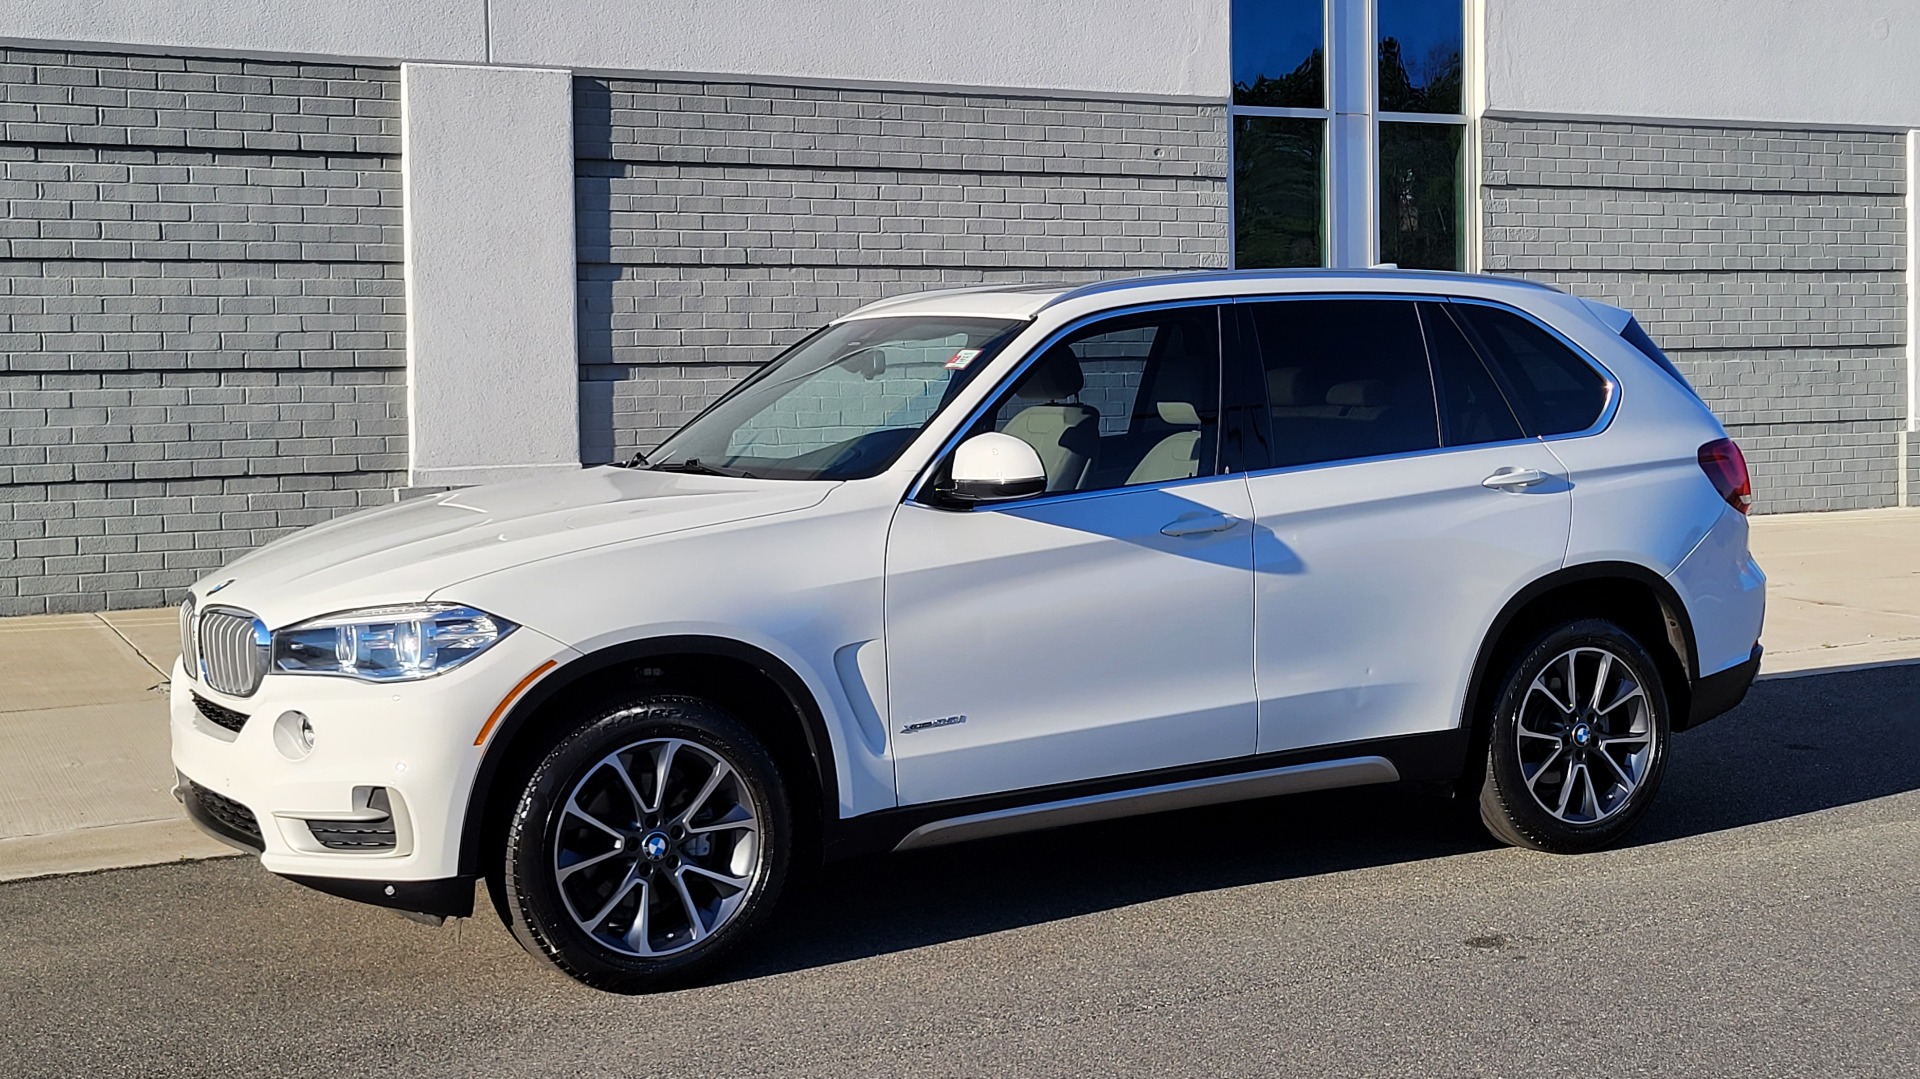 Used 2018 BMW X5 XDRIVE35I PREMIUM / DRVR ASST / HUD / WIRELESS CHARGING / HEATED SEATS for sale $42,995 at Formula Imports in Charlotte NC 28227 3